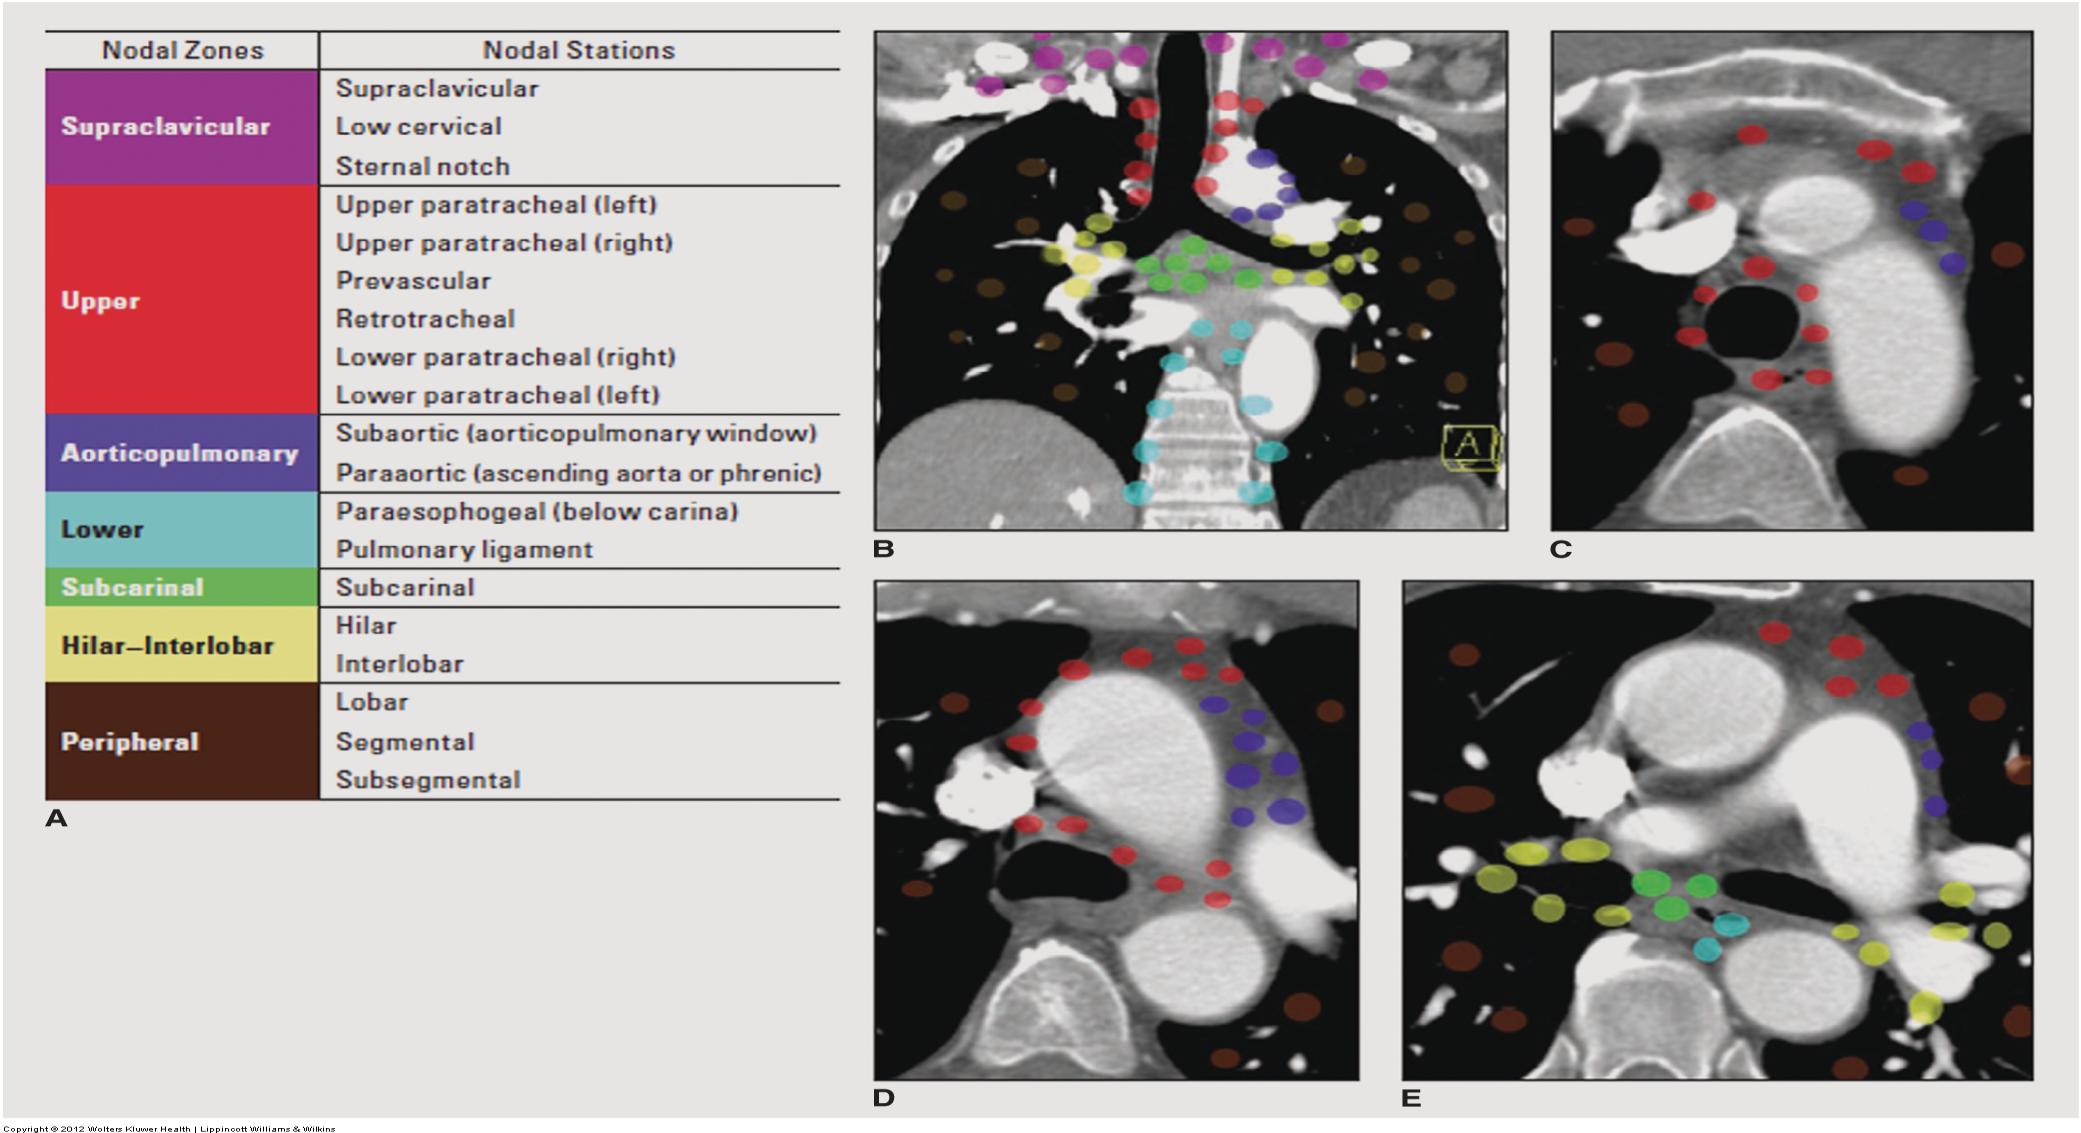 Proposed New Nodal Zones for Lung Cancer Staging.